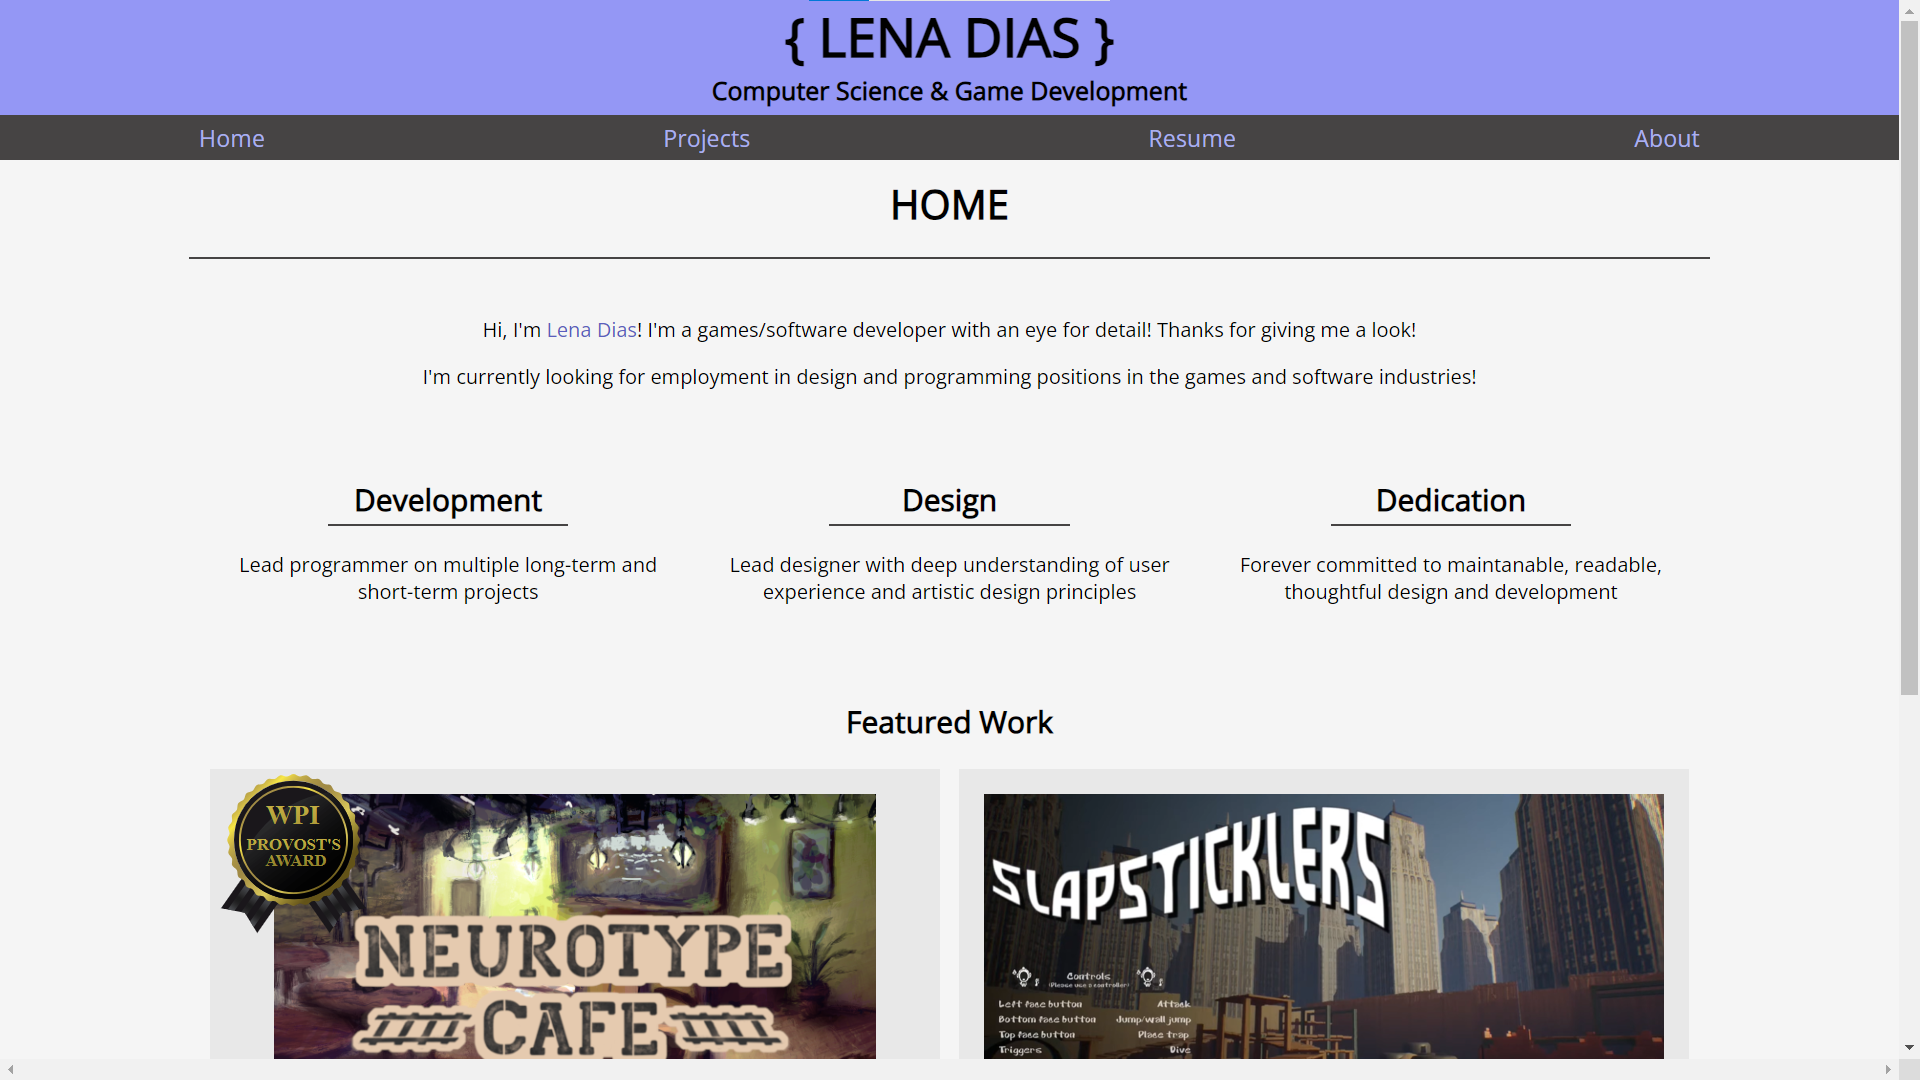 The portfolio home page, displaying virtues, the nav bar, and purple title. Two works featured include Neurotype Cafe and Slapsticklers.